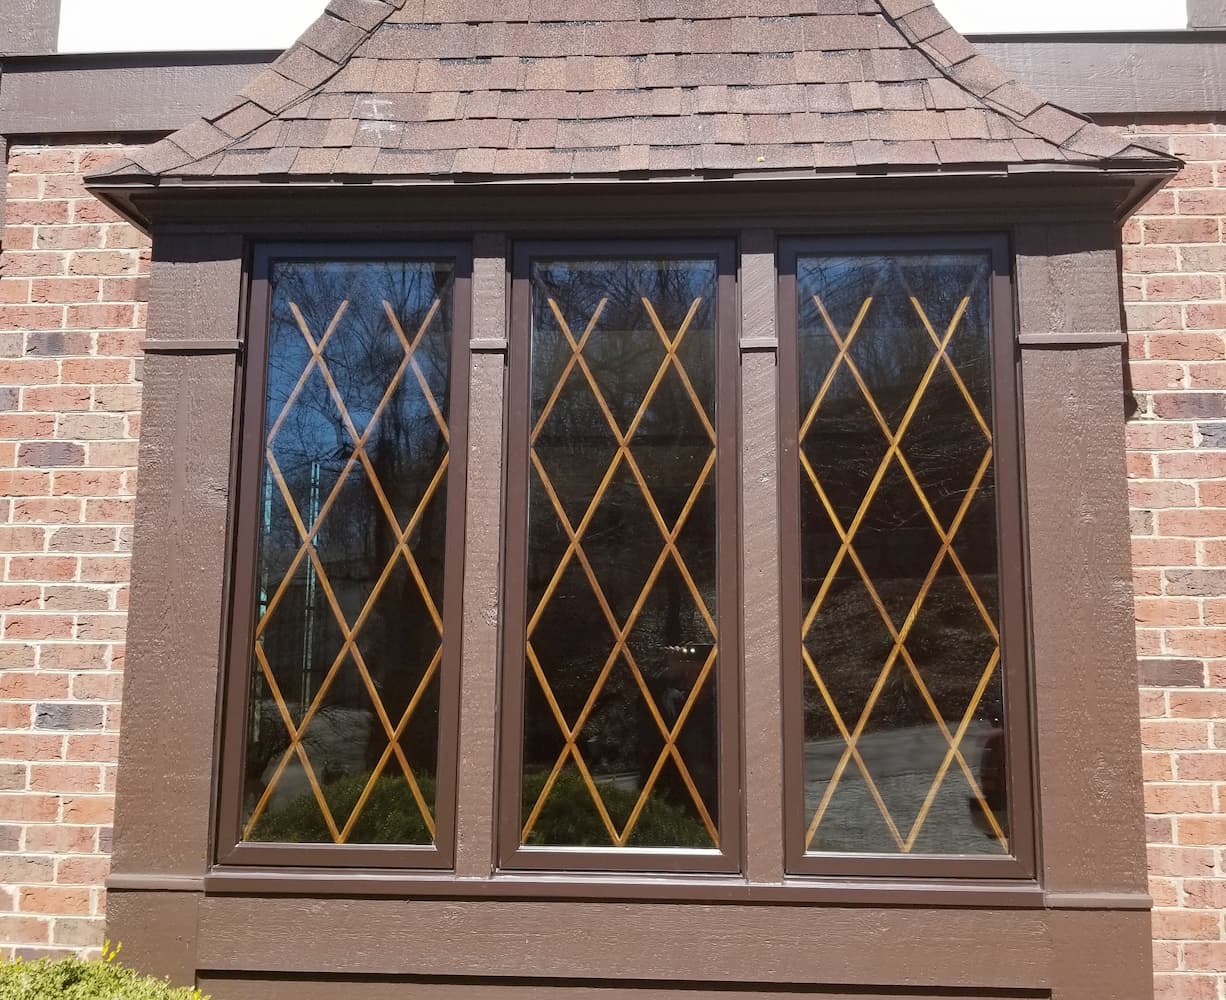 Exterior view of three new wood windows with diamond grille pattern